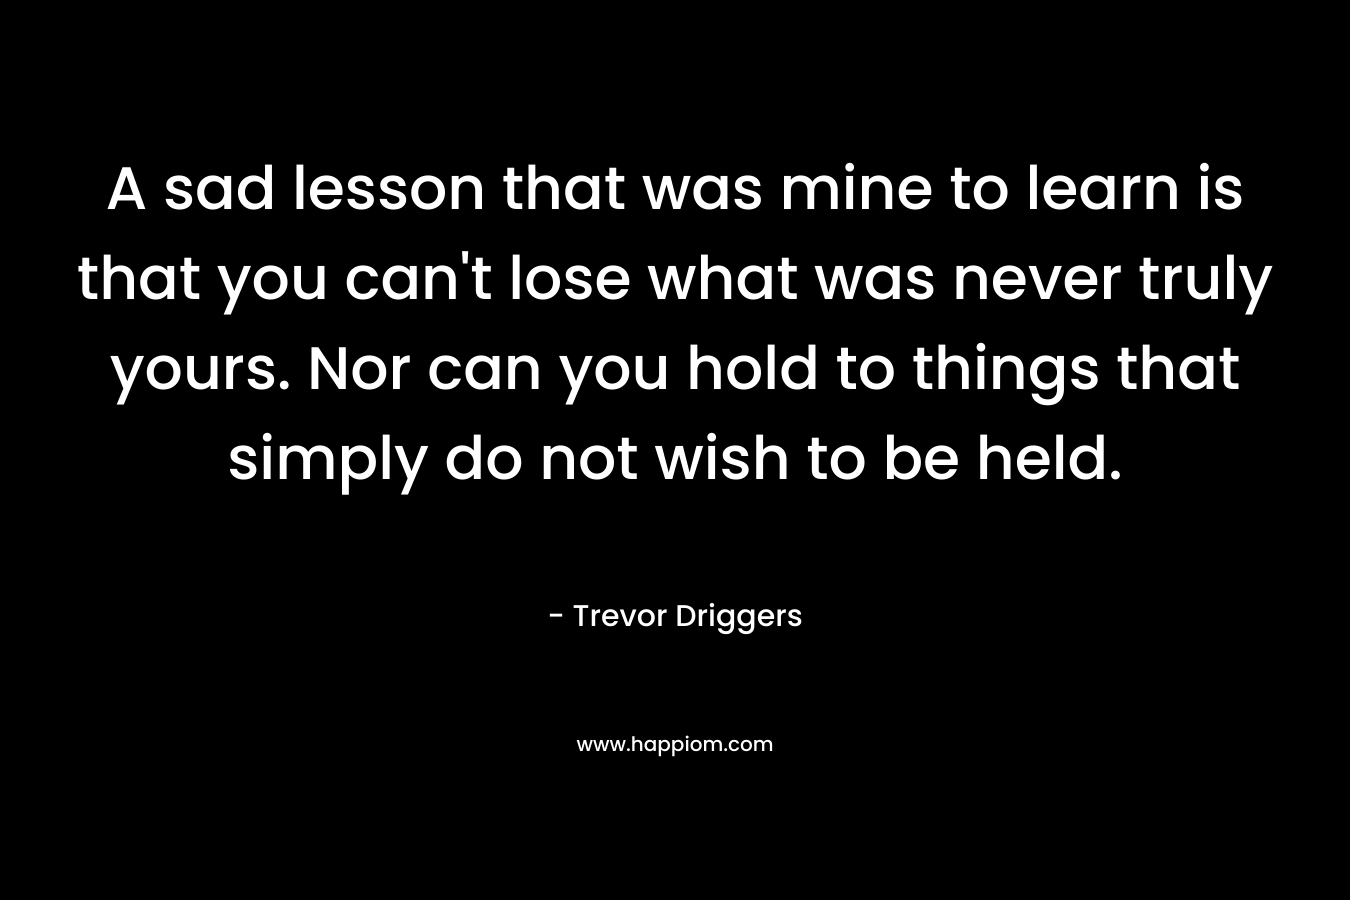 A sad lesson that was mine to learn is that you can't lose what was never truly yours. Nor can you hold to things that simply do not wish to be held.